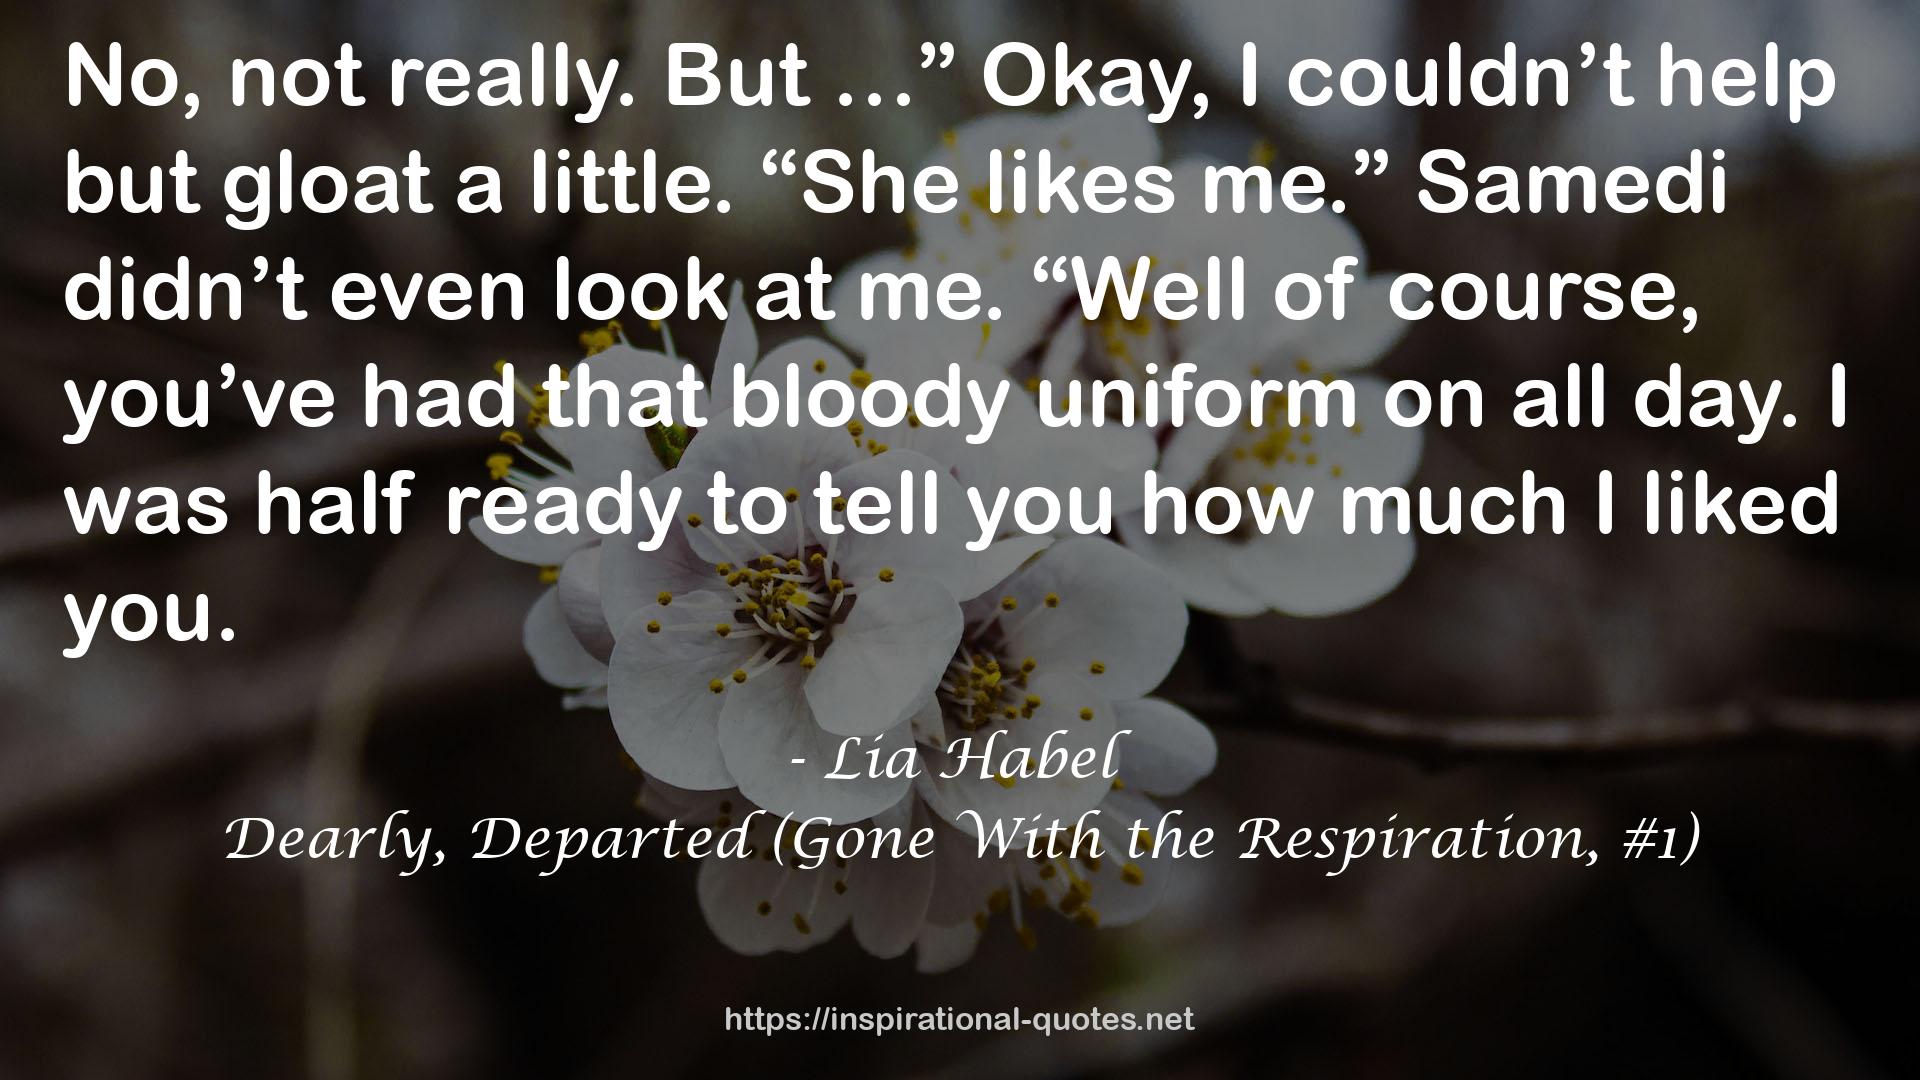 Dearly, Departed (Gone With the Respiration, #1) QUOTES